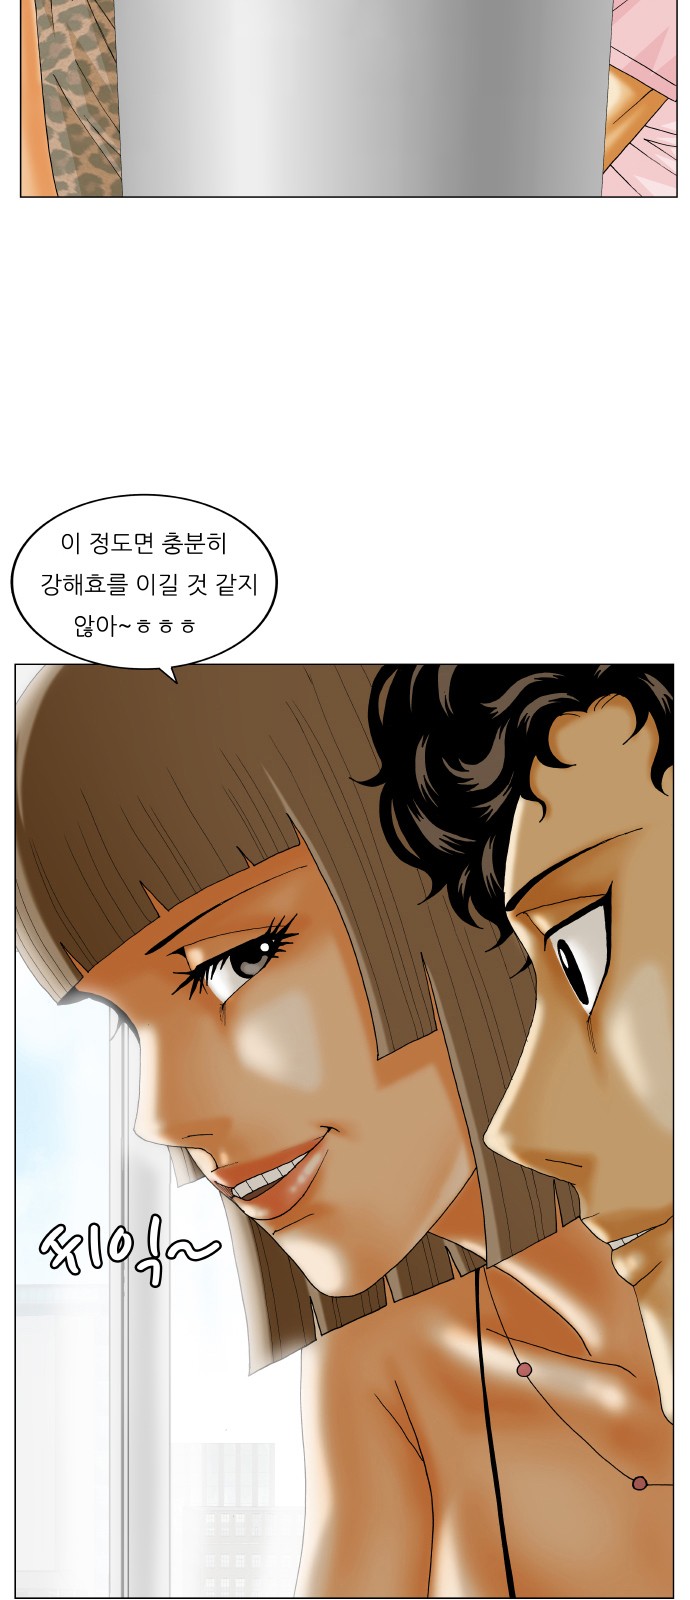 Ultimate Legend - Kang Hae Hyo - Chapter 219 - Page 3